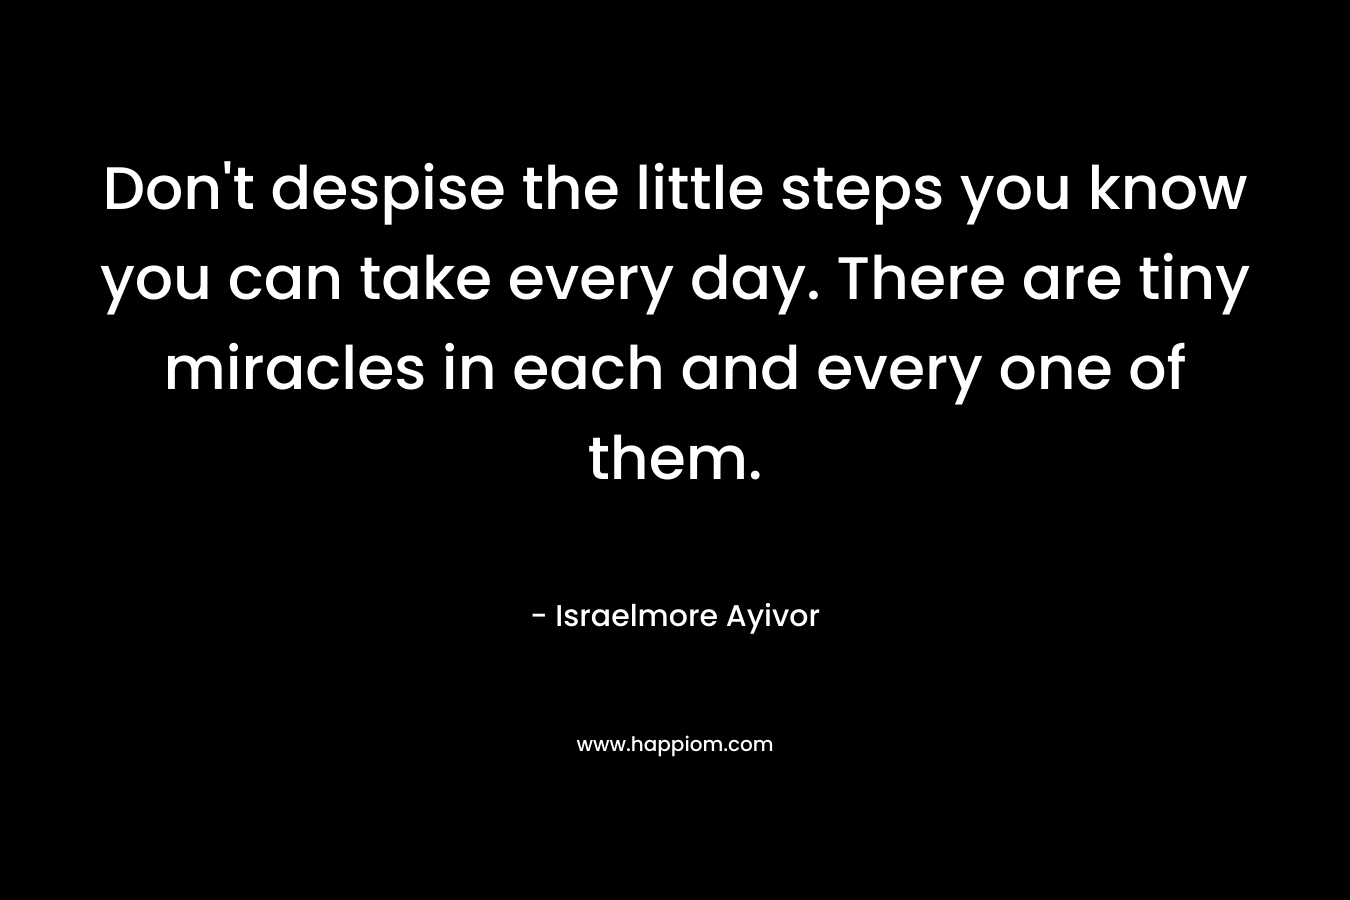 Don't despise the little steps you know you can take every day. There are tiny miracles in each and every one of them.